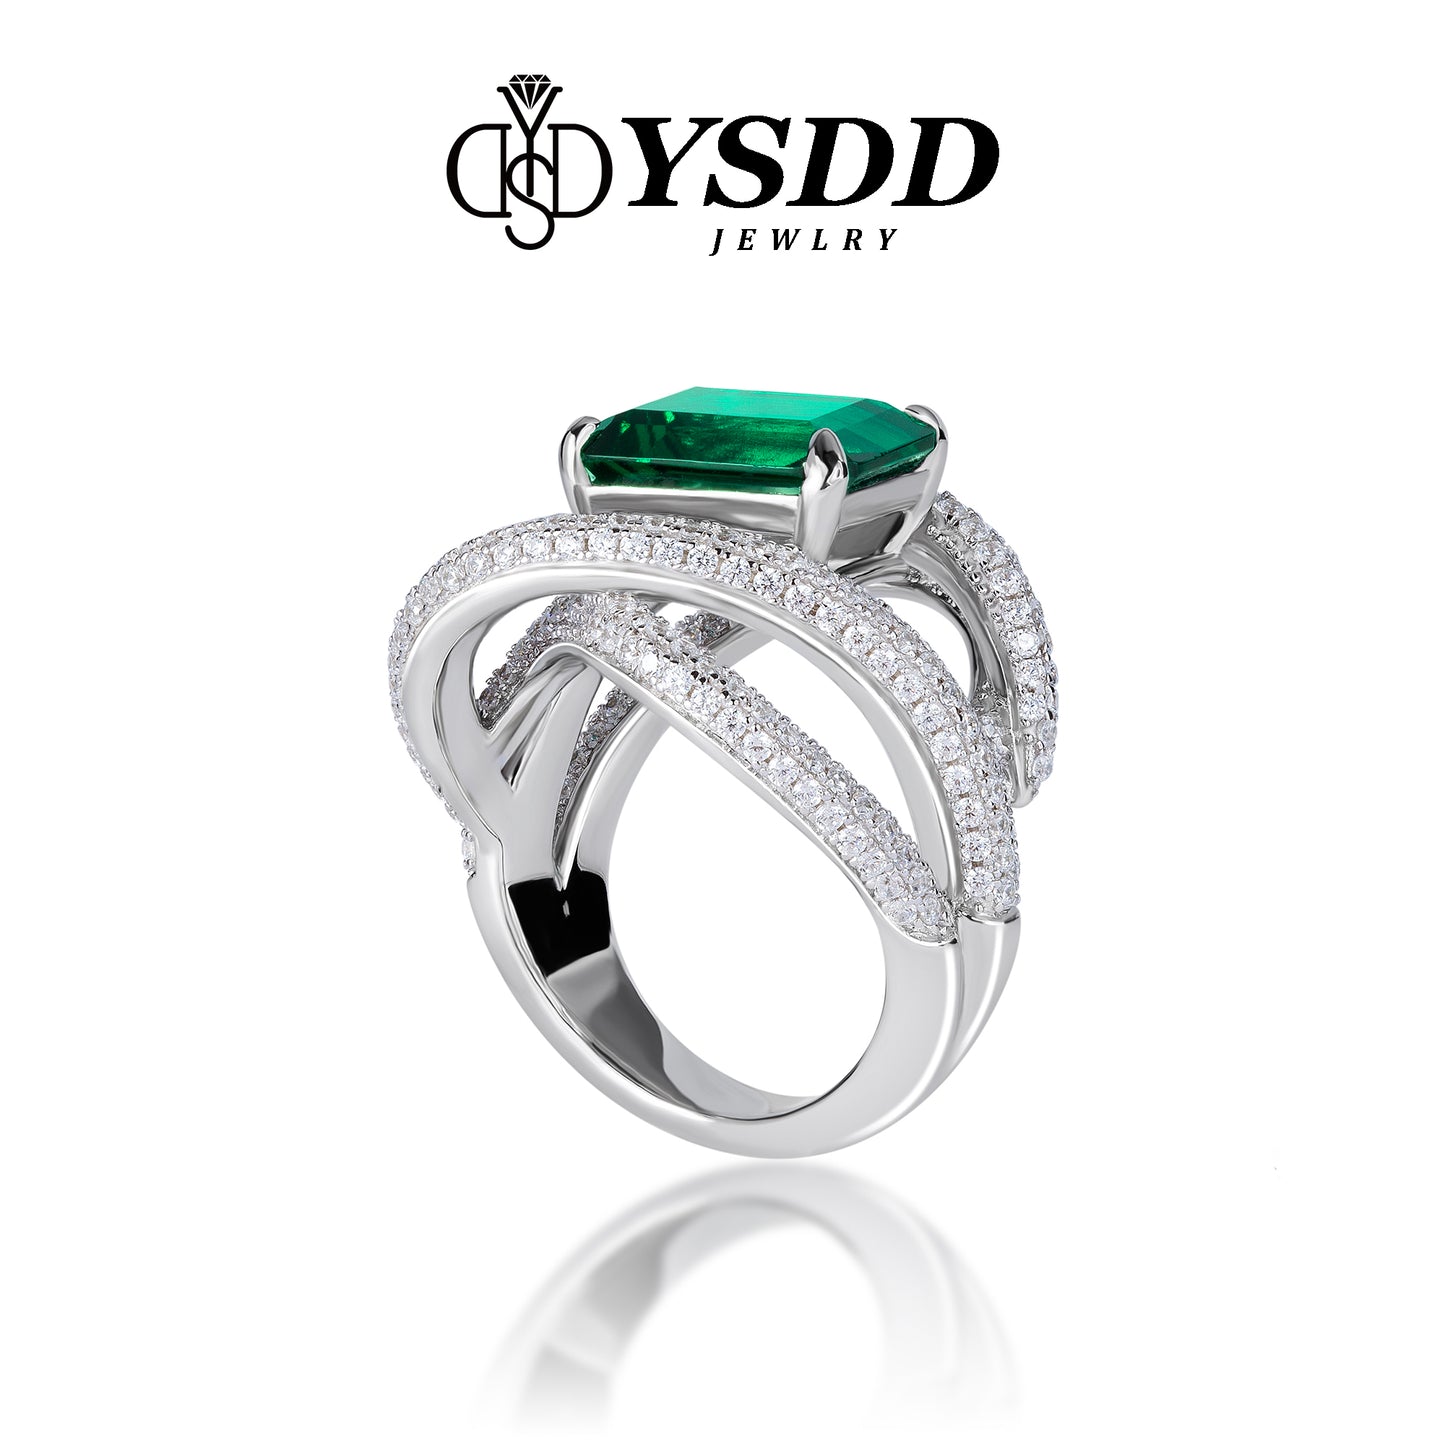 【#609 Medusa】Luxury 4CT Synthetic Emerald Cocktail Ring in 925 Sterling Silver